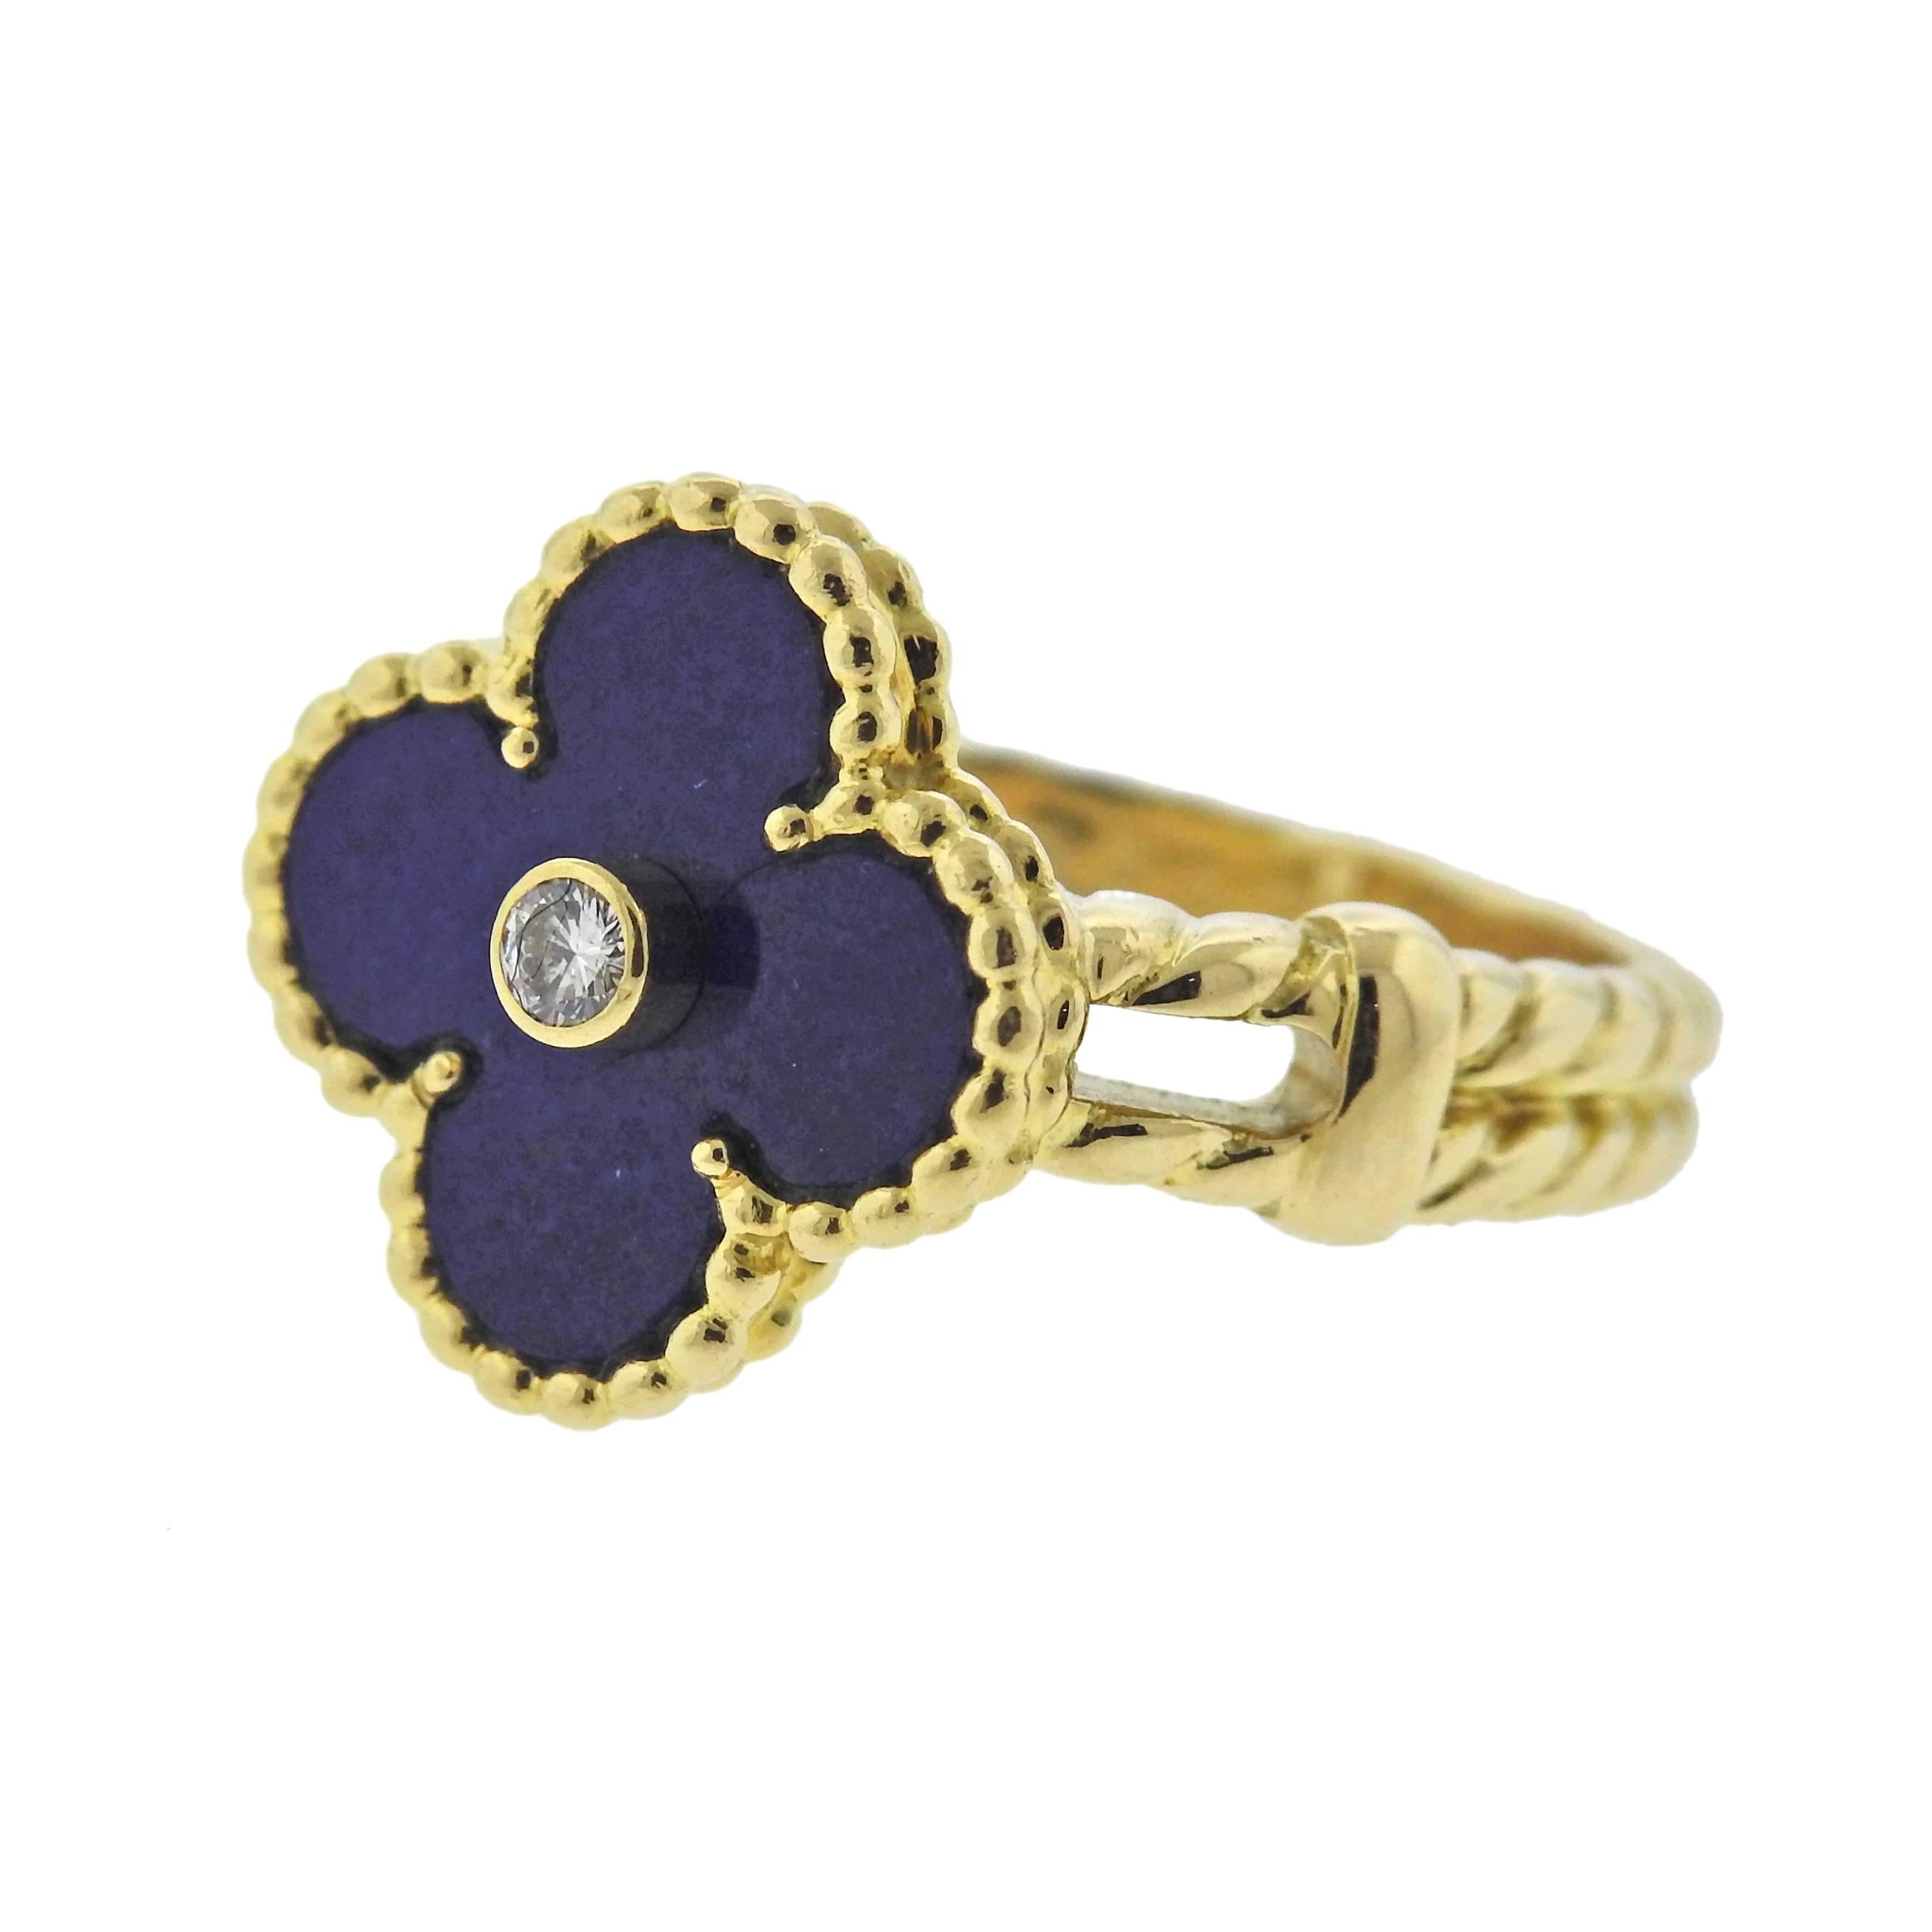  18k yellow gold Alhambra ring, crafted by Van Cleef & Arpels, featuring 0.06ct F/VVS diamond and lapis top. Ring size - 6, ring top - 15mm x 15mm, weighs 7.8 grams. Marked: VCA, 18kt, B5938****, 0.06ct. 